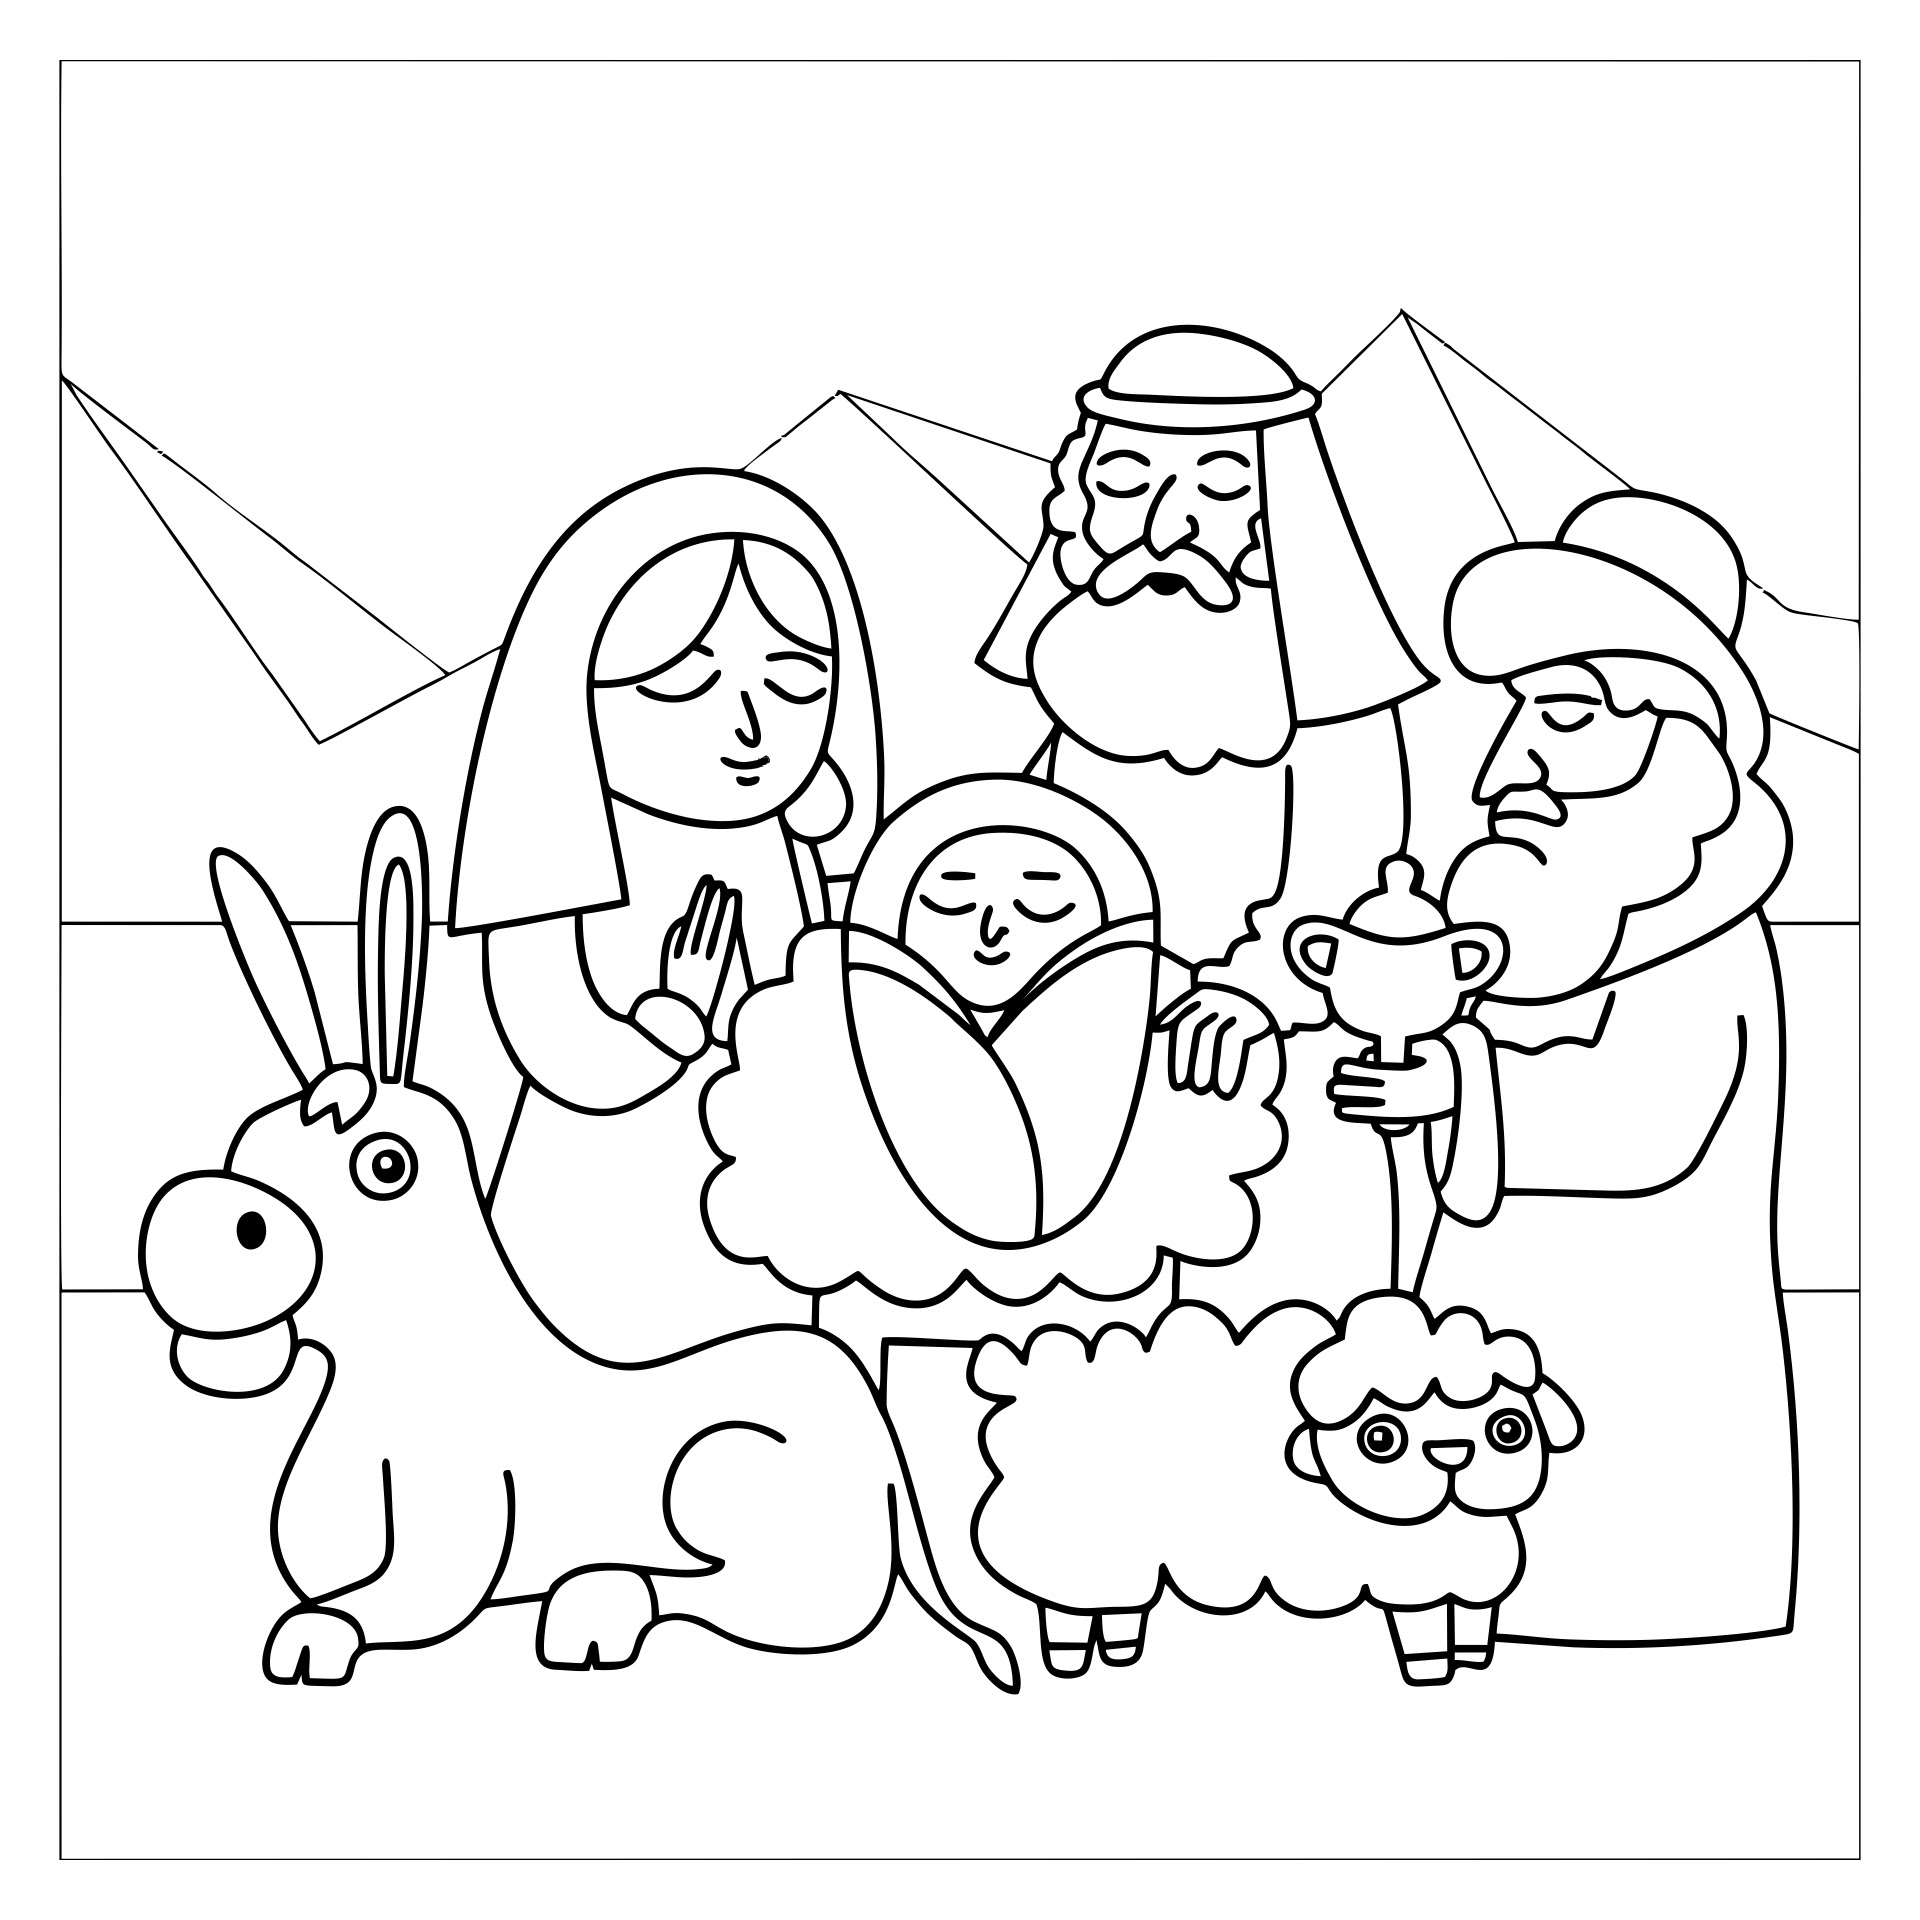 7 Best Images of Nativity Story Printable Book Printable Nativity Story for Children, Nativity